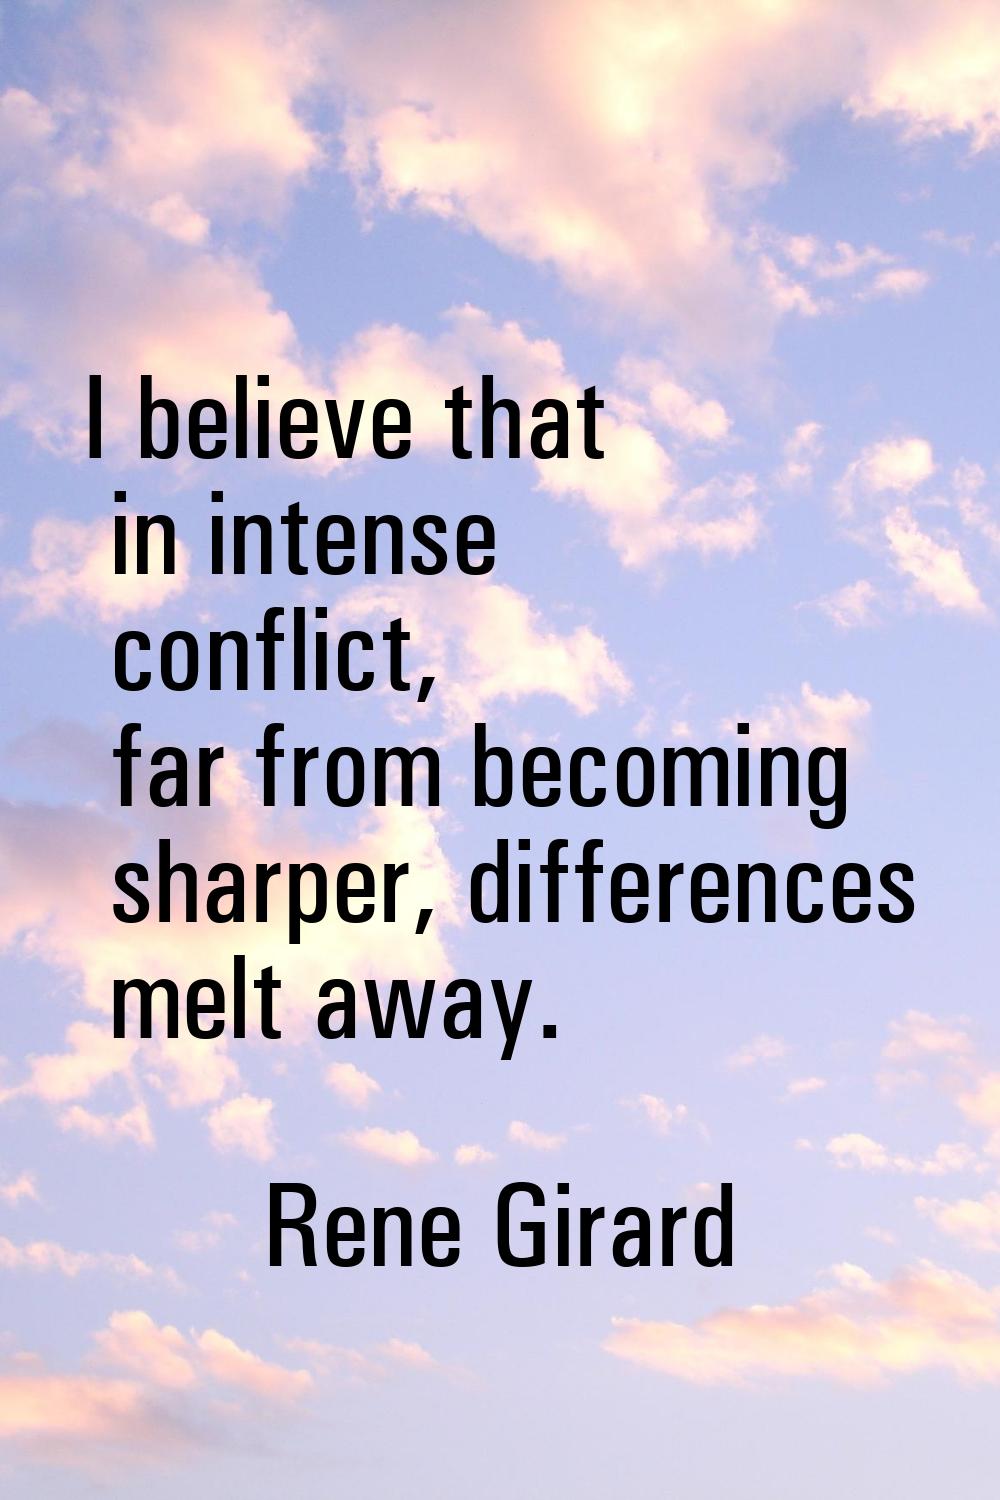 I believe that in intense conflict, far from becoming sharper, differences melt away.